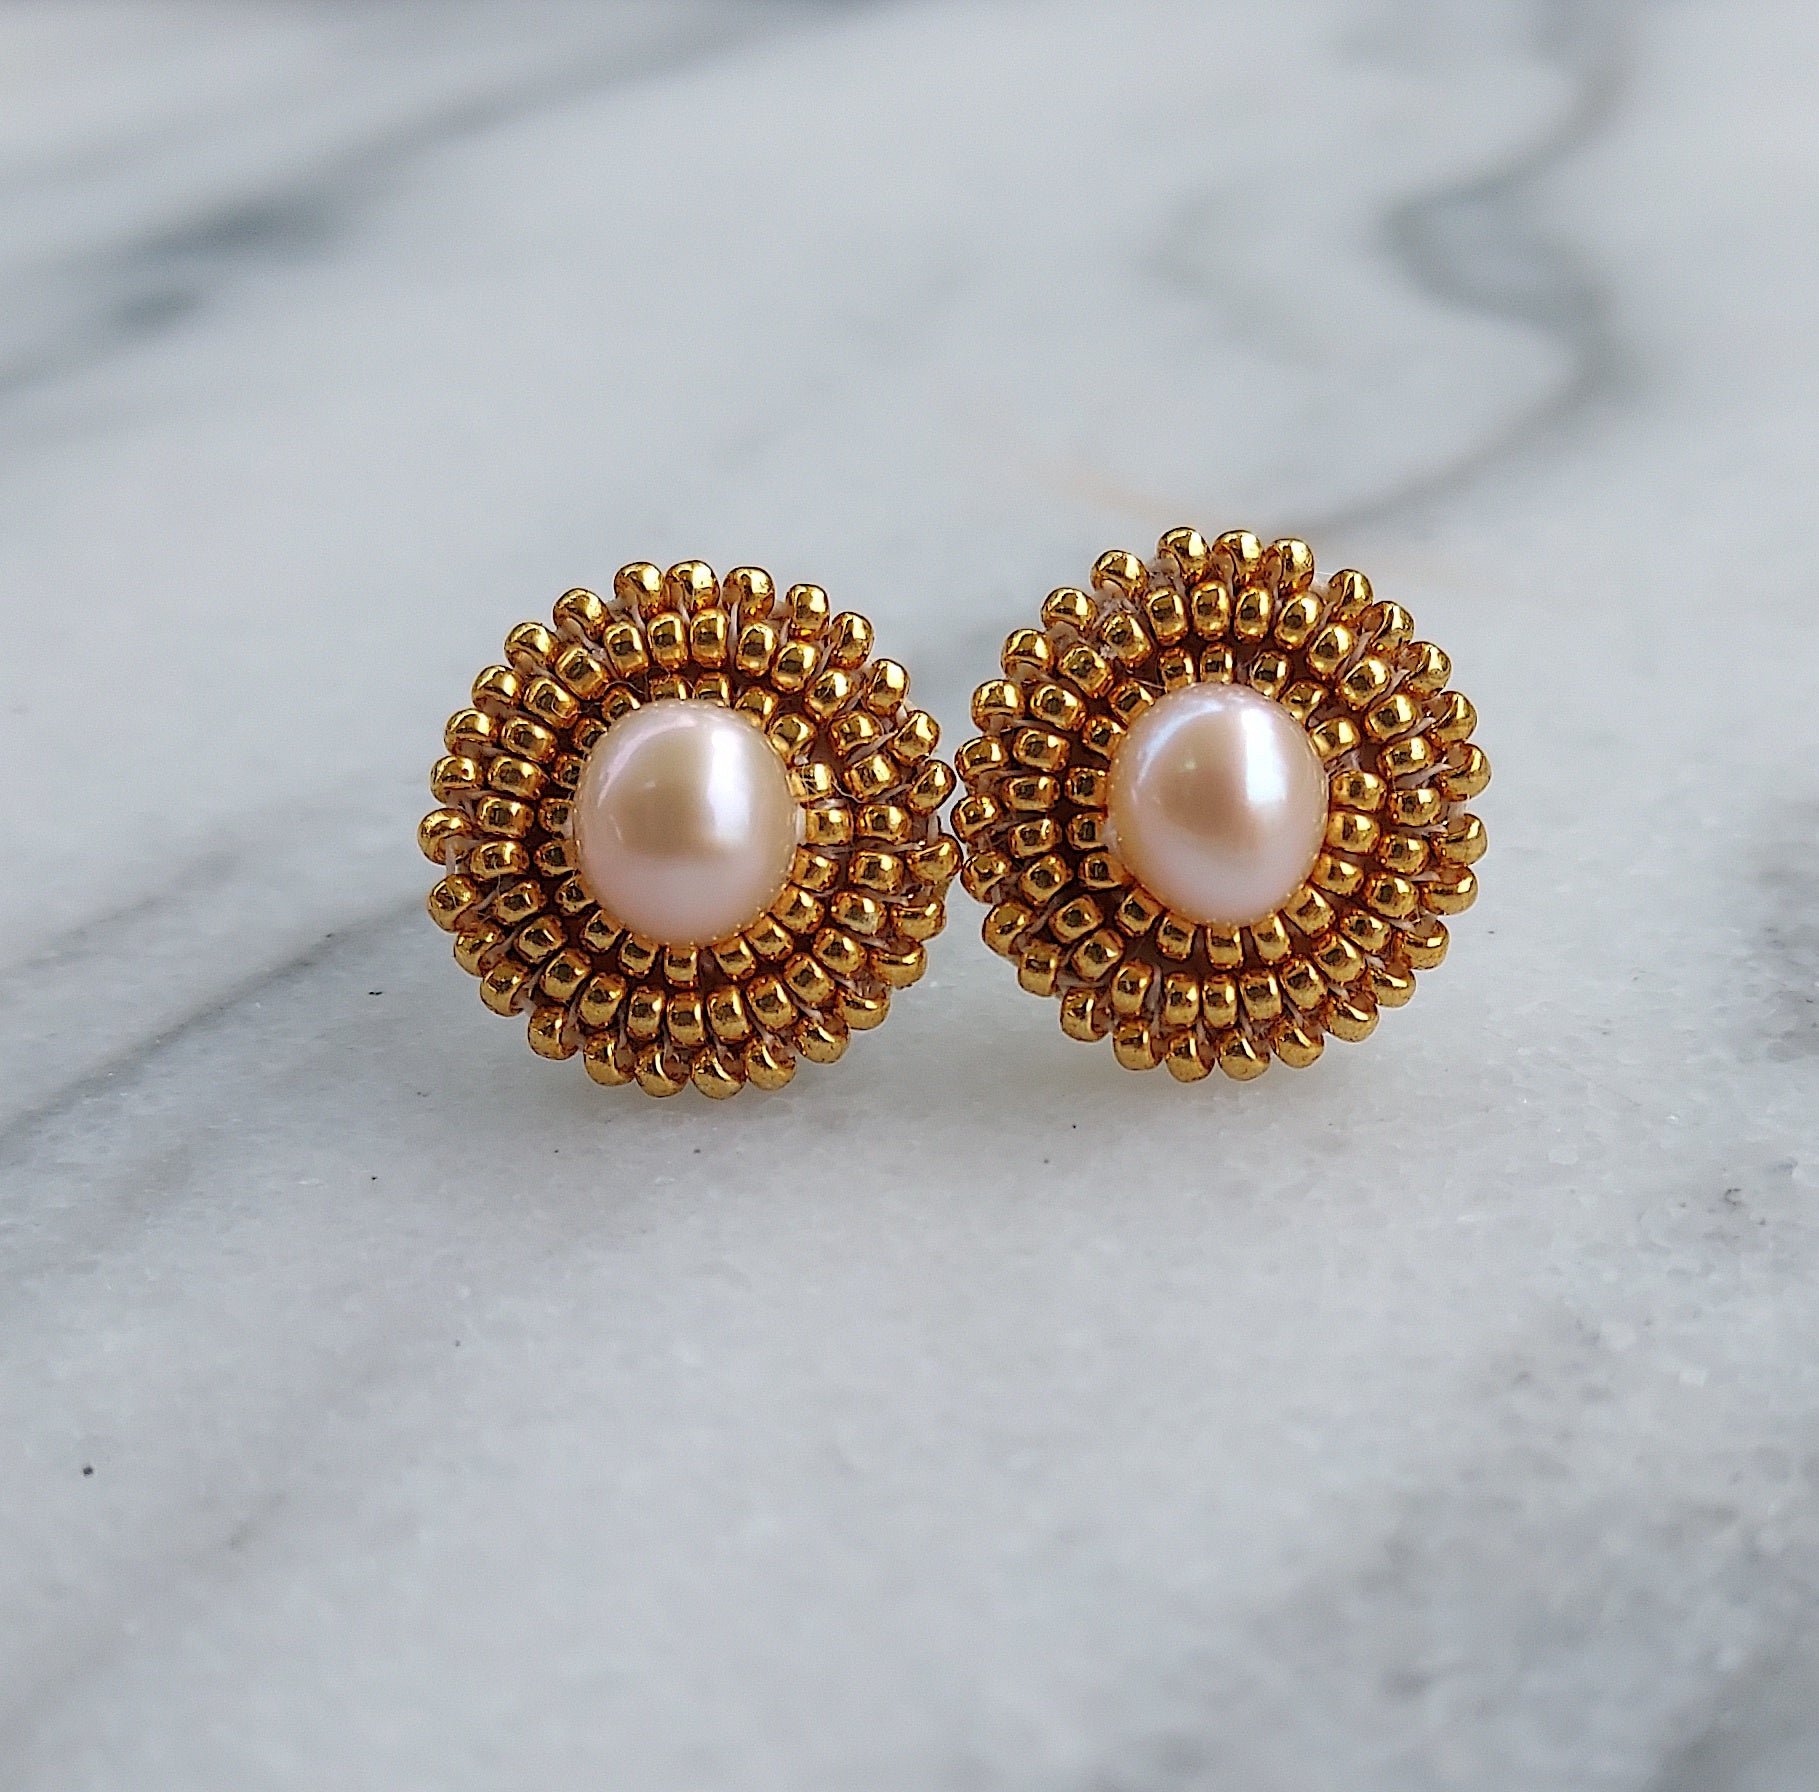 Cheyanne Symone’s Golden Hour Freshwater Pearl Earrings | Golden Hour Seed Beads Wrapped Around a Freshwater Pearl Center